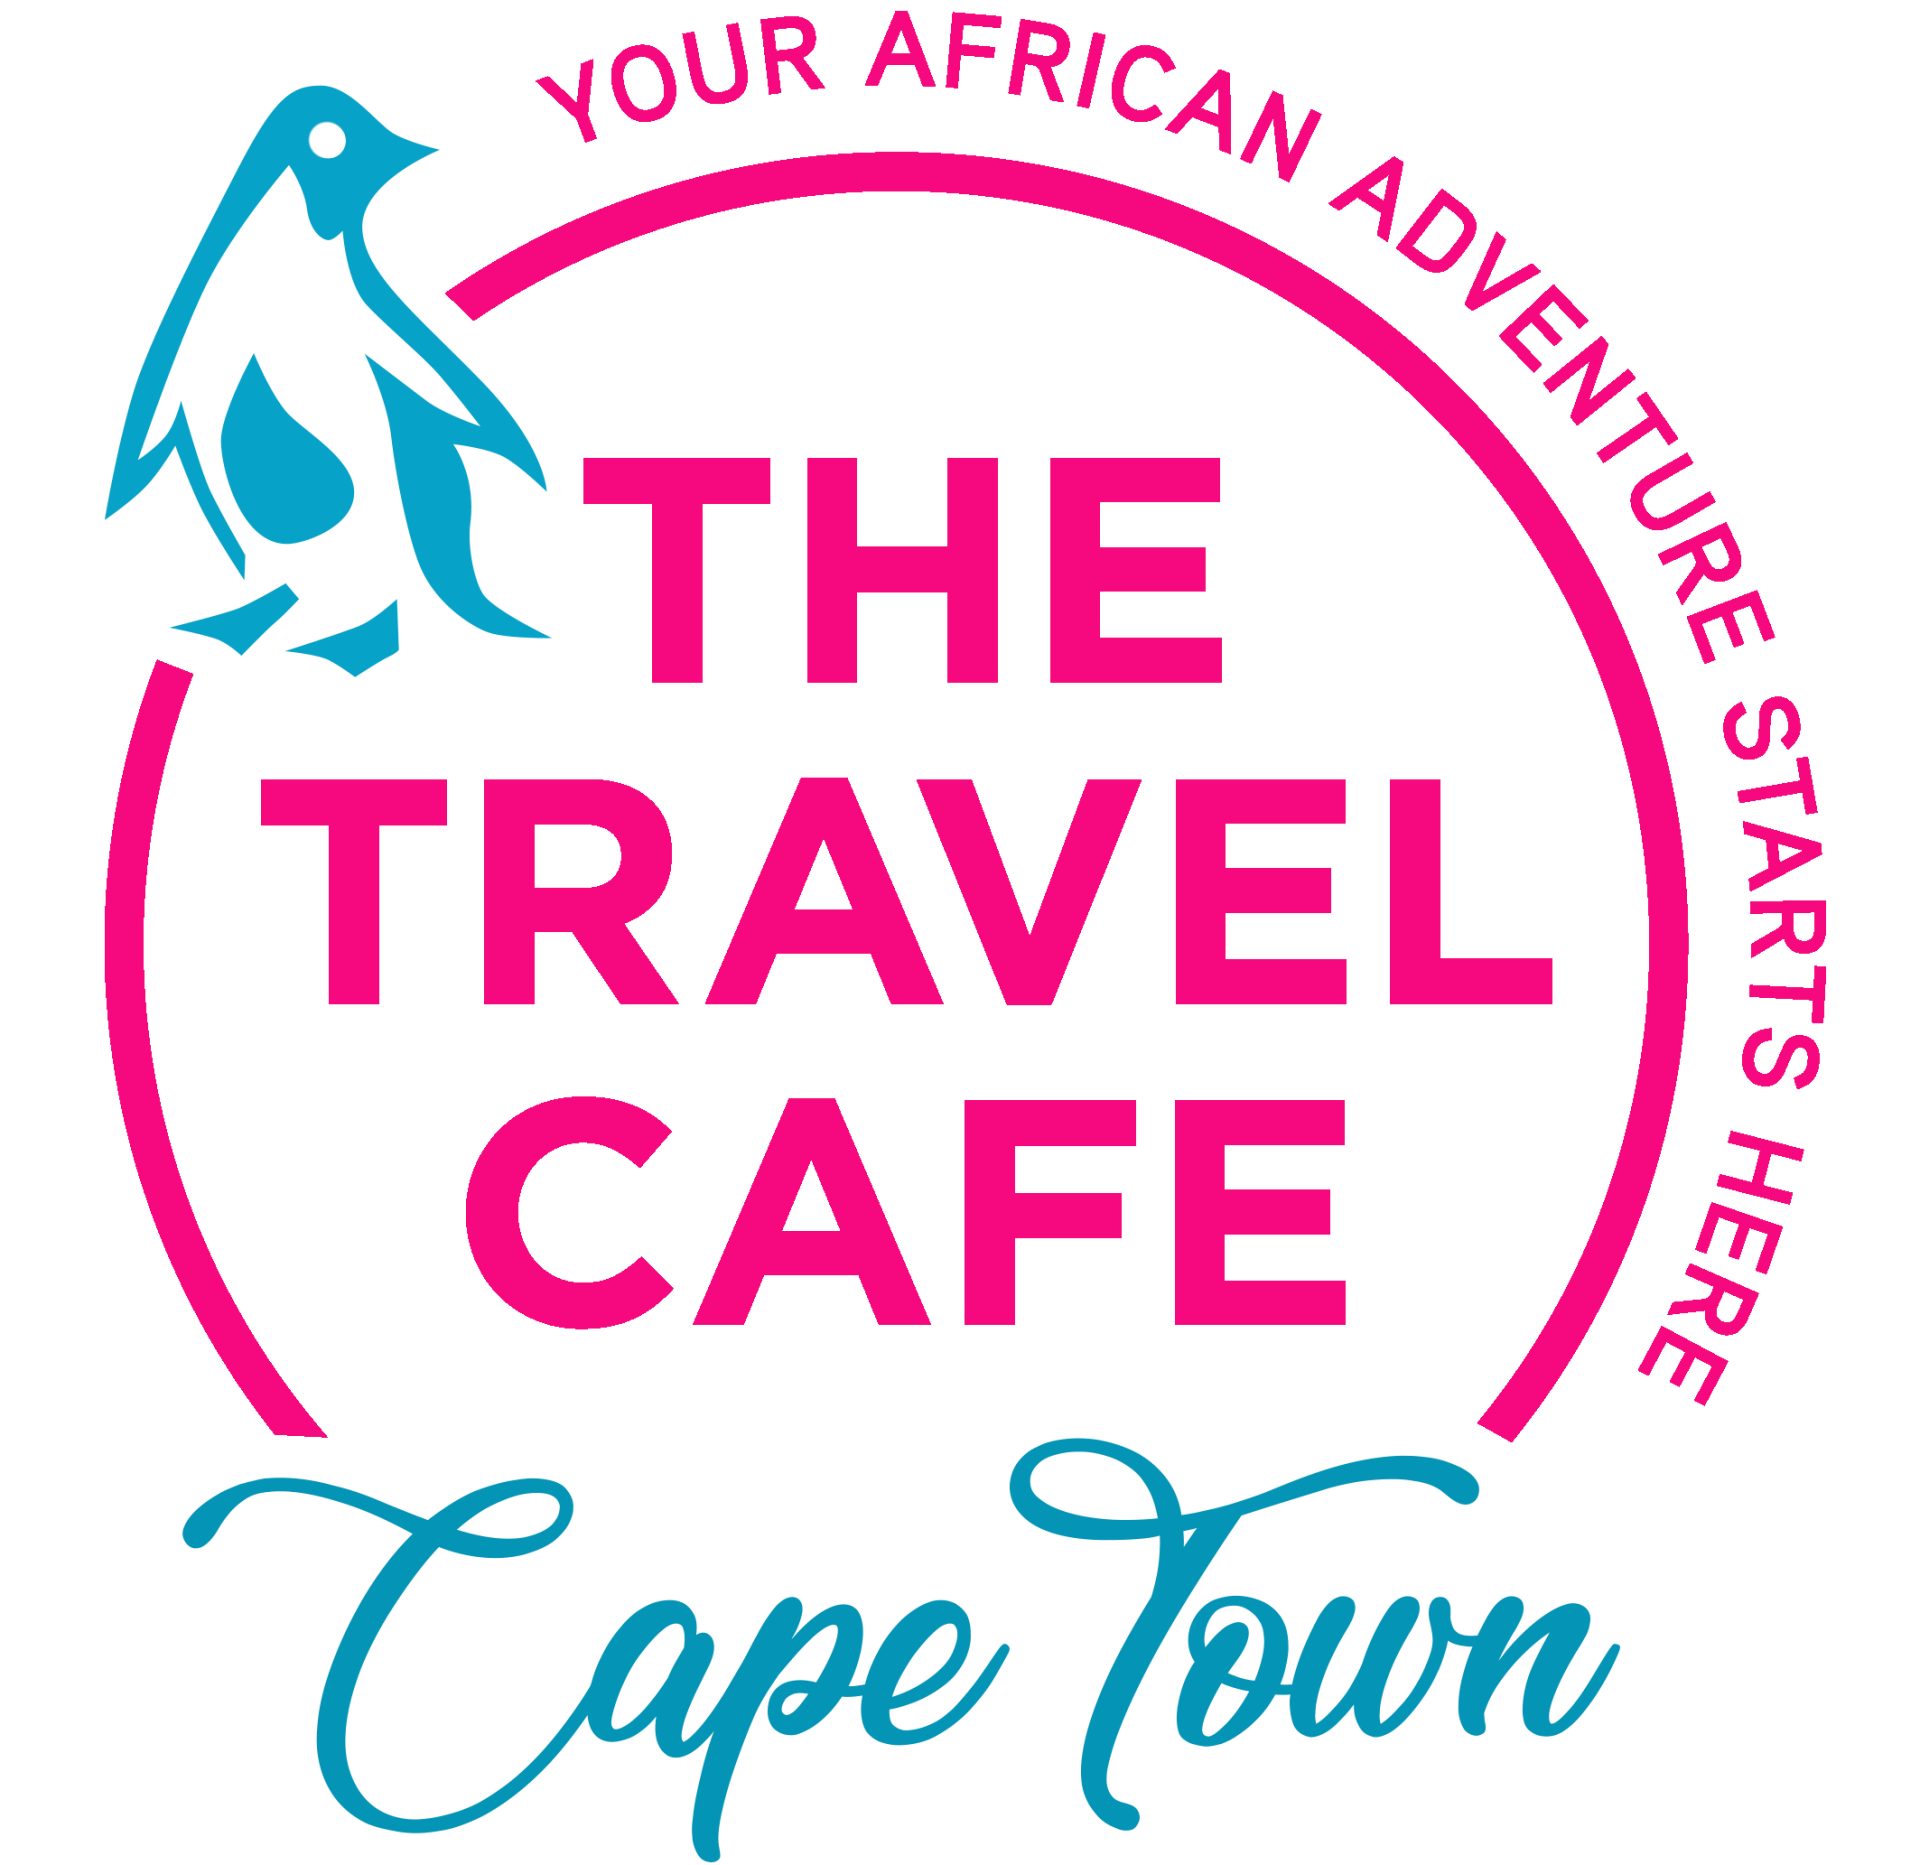 Logo The Travel Cafe Cape Town